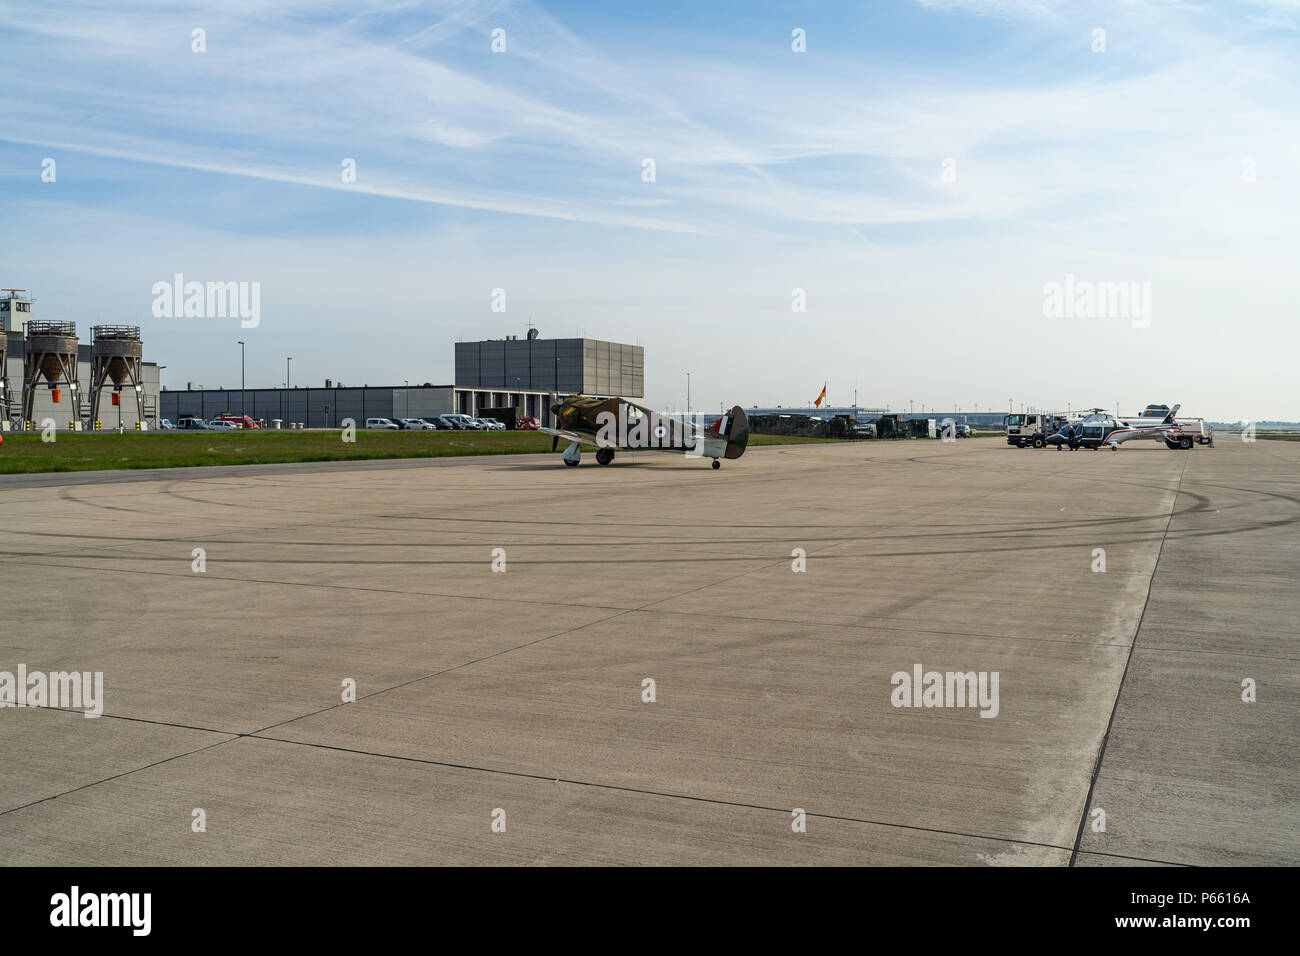 BERLIN - APRIL 27, 2018: Fighter aircraft CAC Boomerang on the airfield. Exhibition ILA Berlin Air Show 2018. Stock Photo